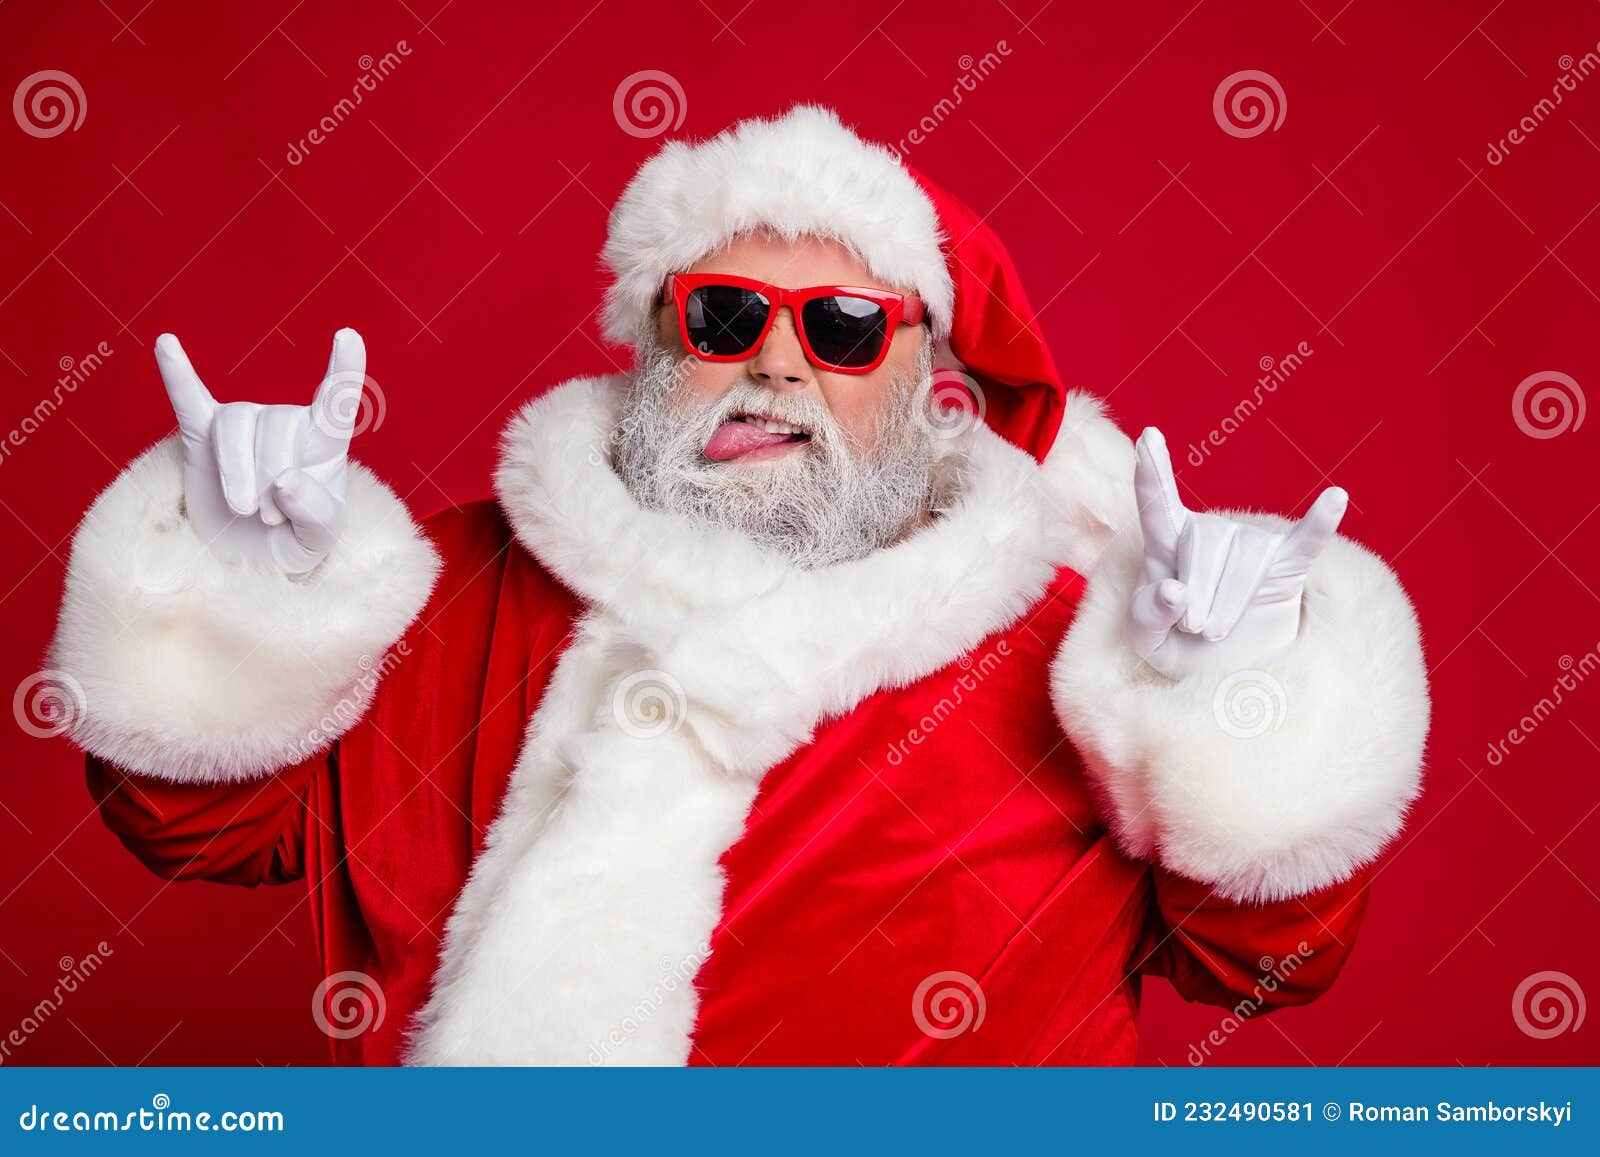 photo of funny crazy rude careless old man show horns protrude tongue wear santa hat costume  red color